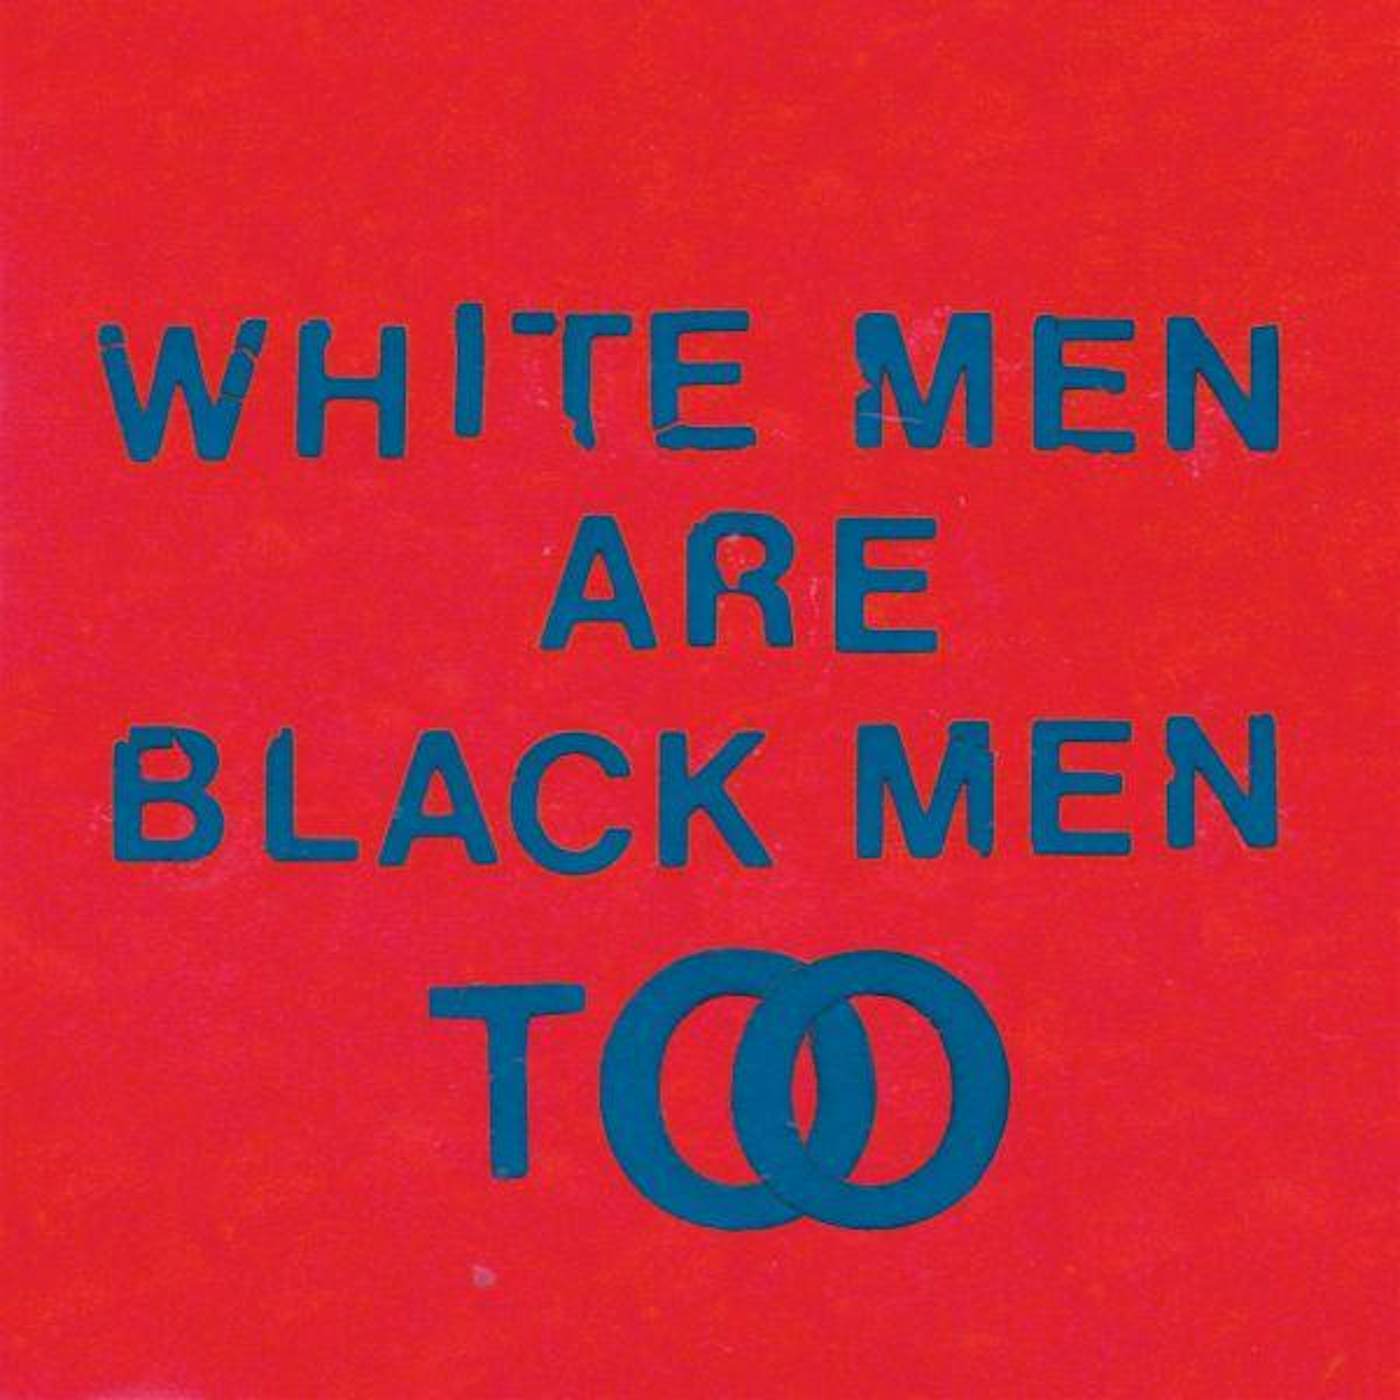 Young Fathers White Men Are Black Men Too Vinyl Record